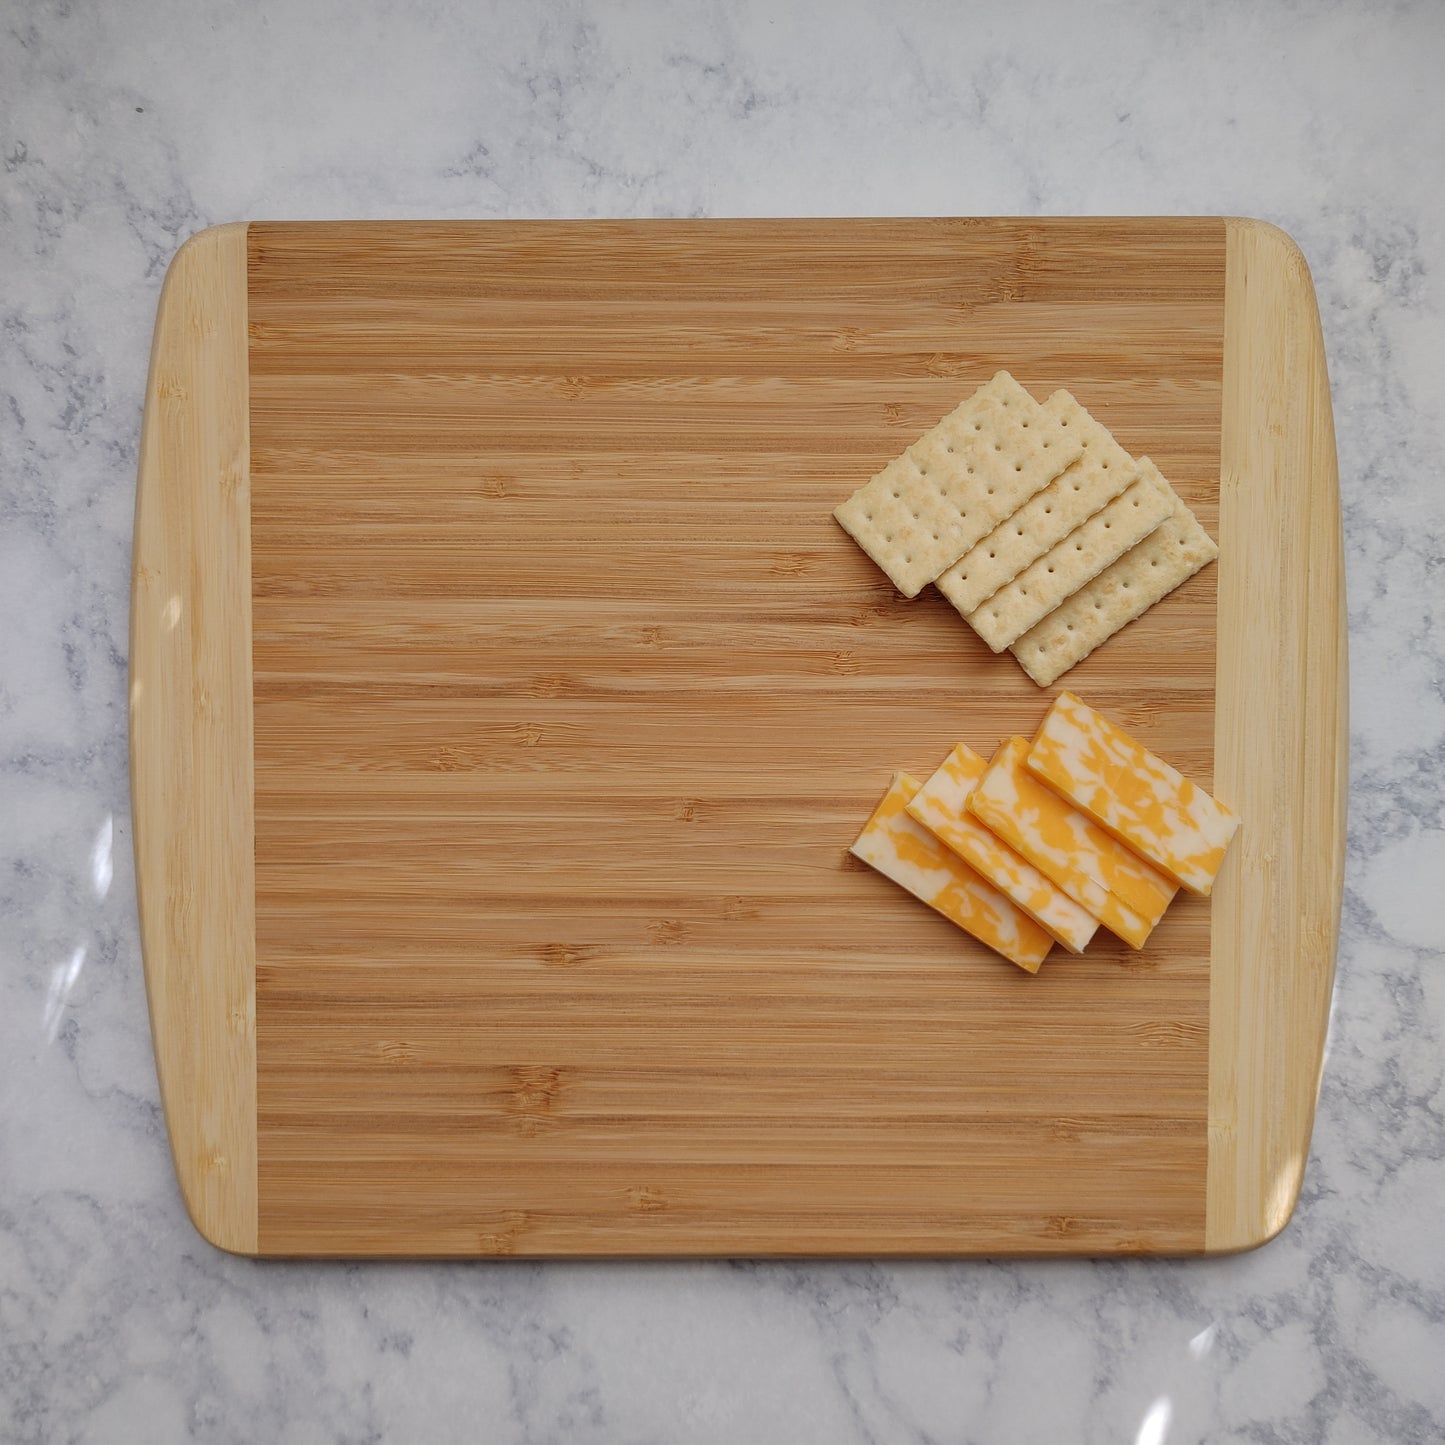 Extra Large Custom Cutting Board with Kid’s Drawing, Family Recipe, Initials, Favorite Hashtag & more